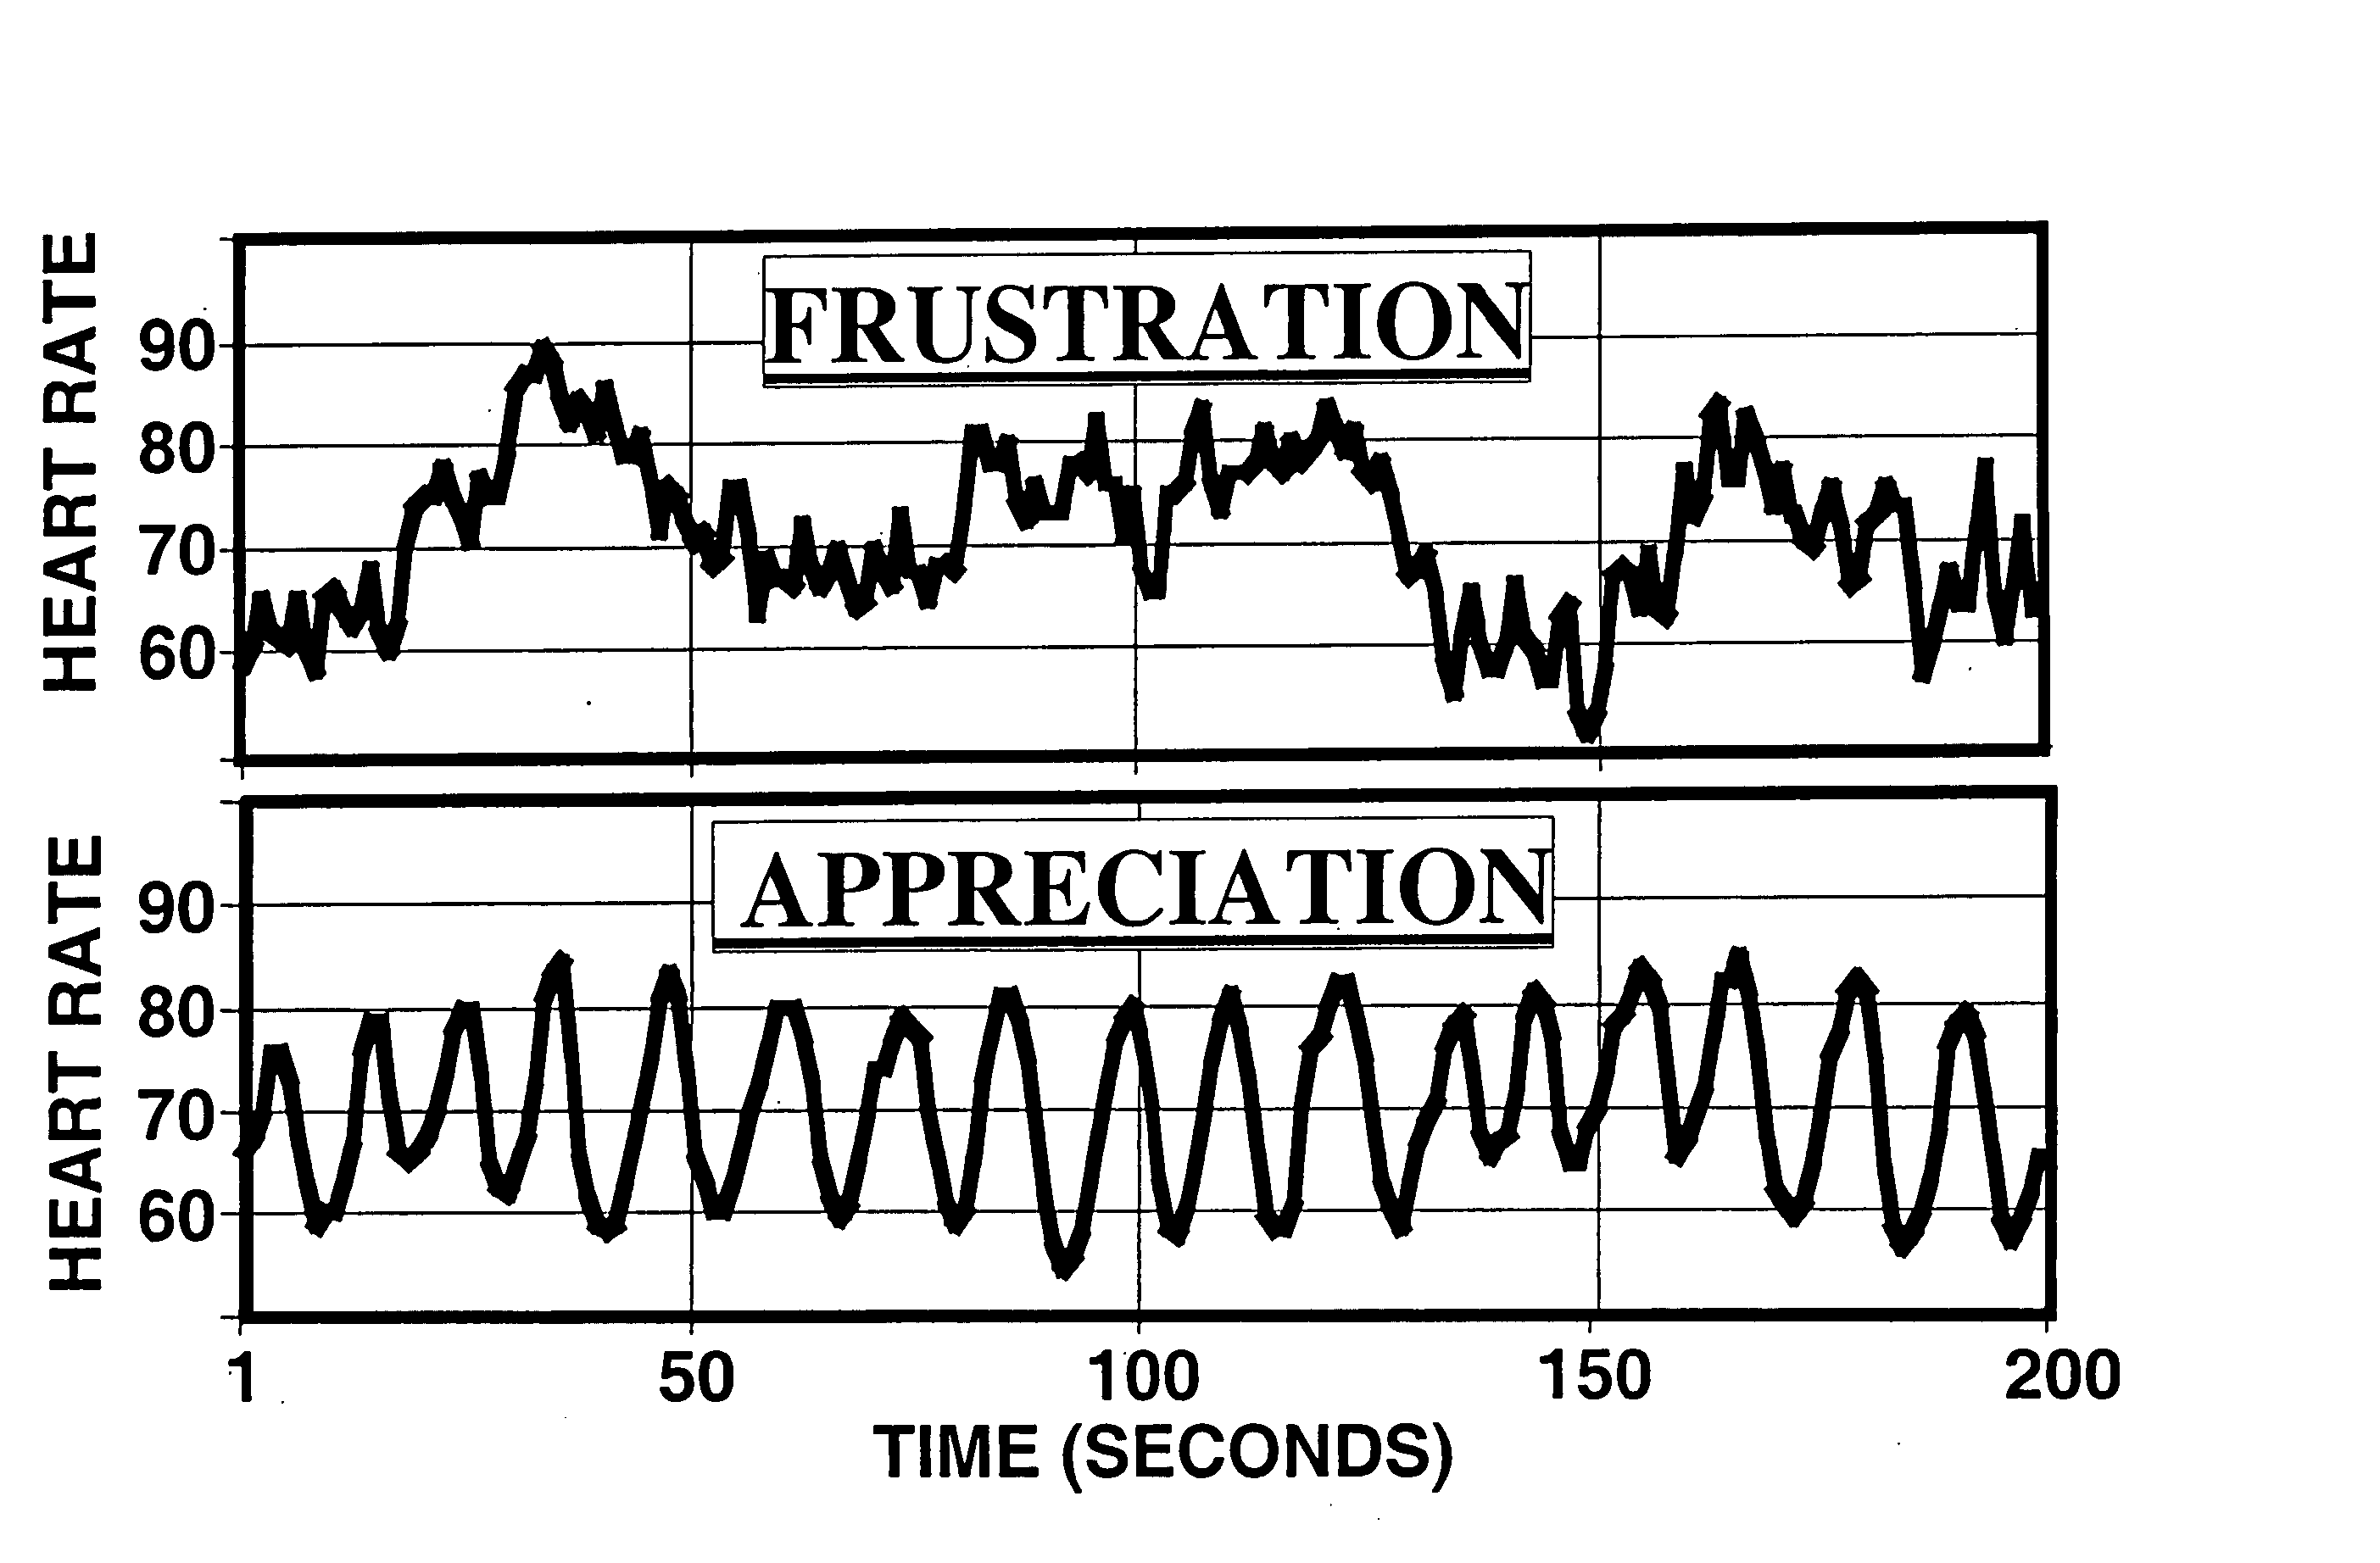 Electrophysiological intuition indicator